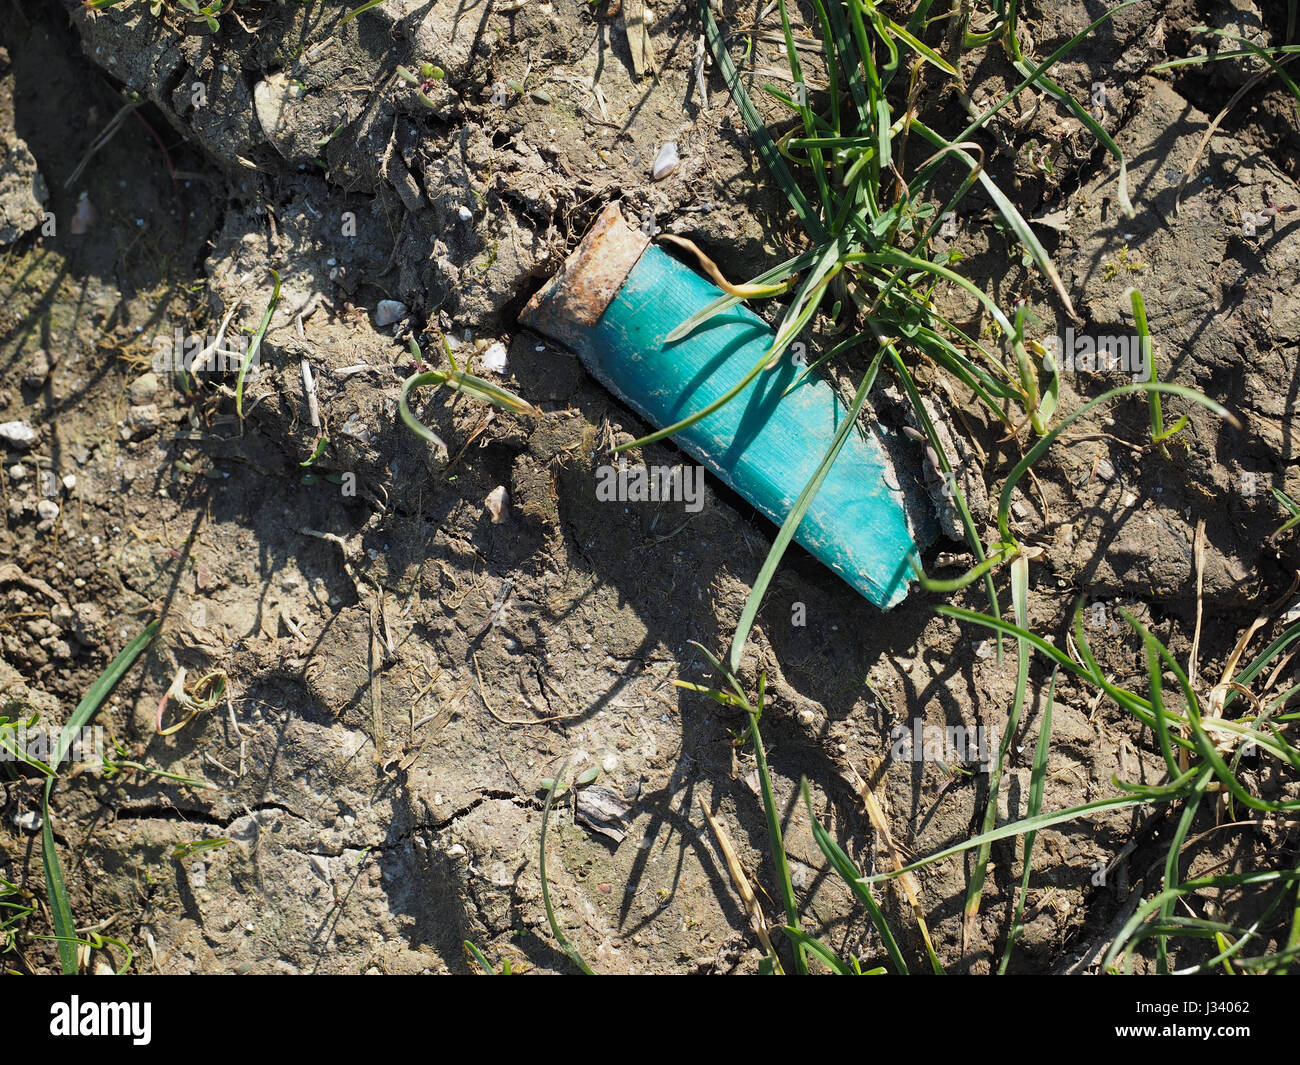 a green spent shot empty discarded dropped ammunition gun shell cartridge litter trodden in dry earth mud Stock Photo